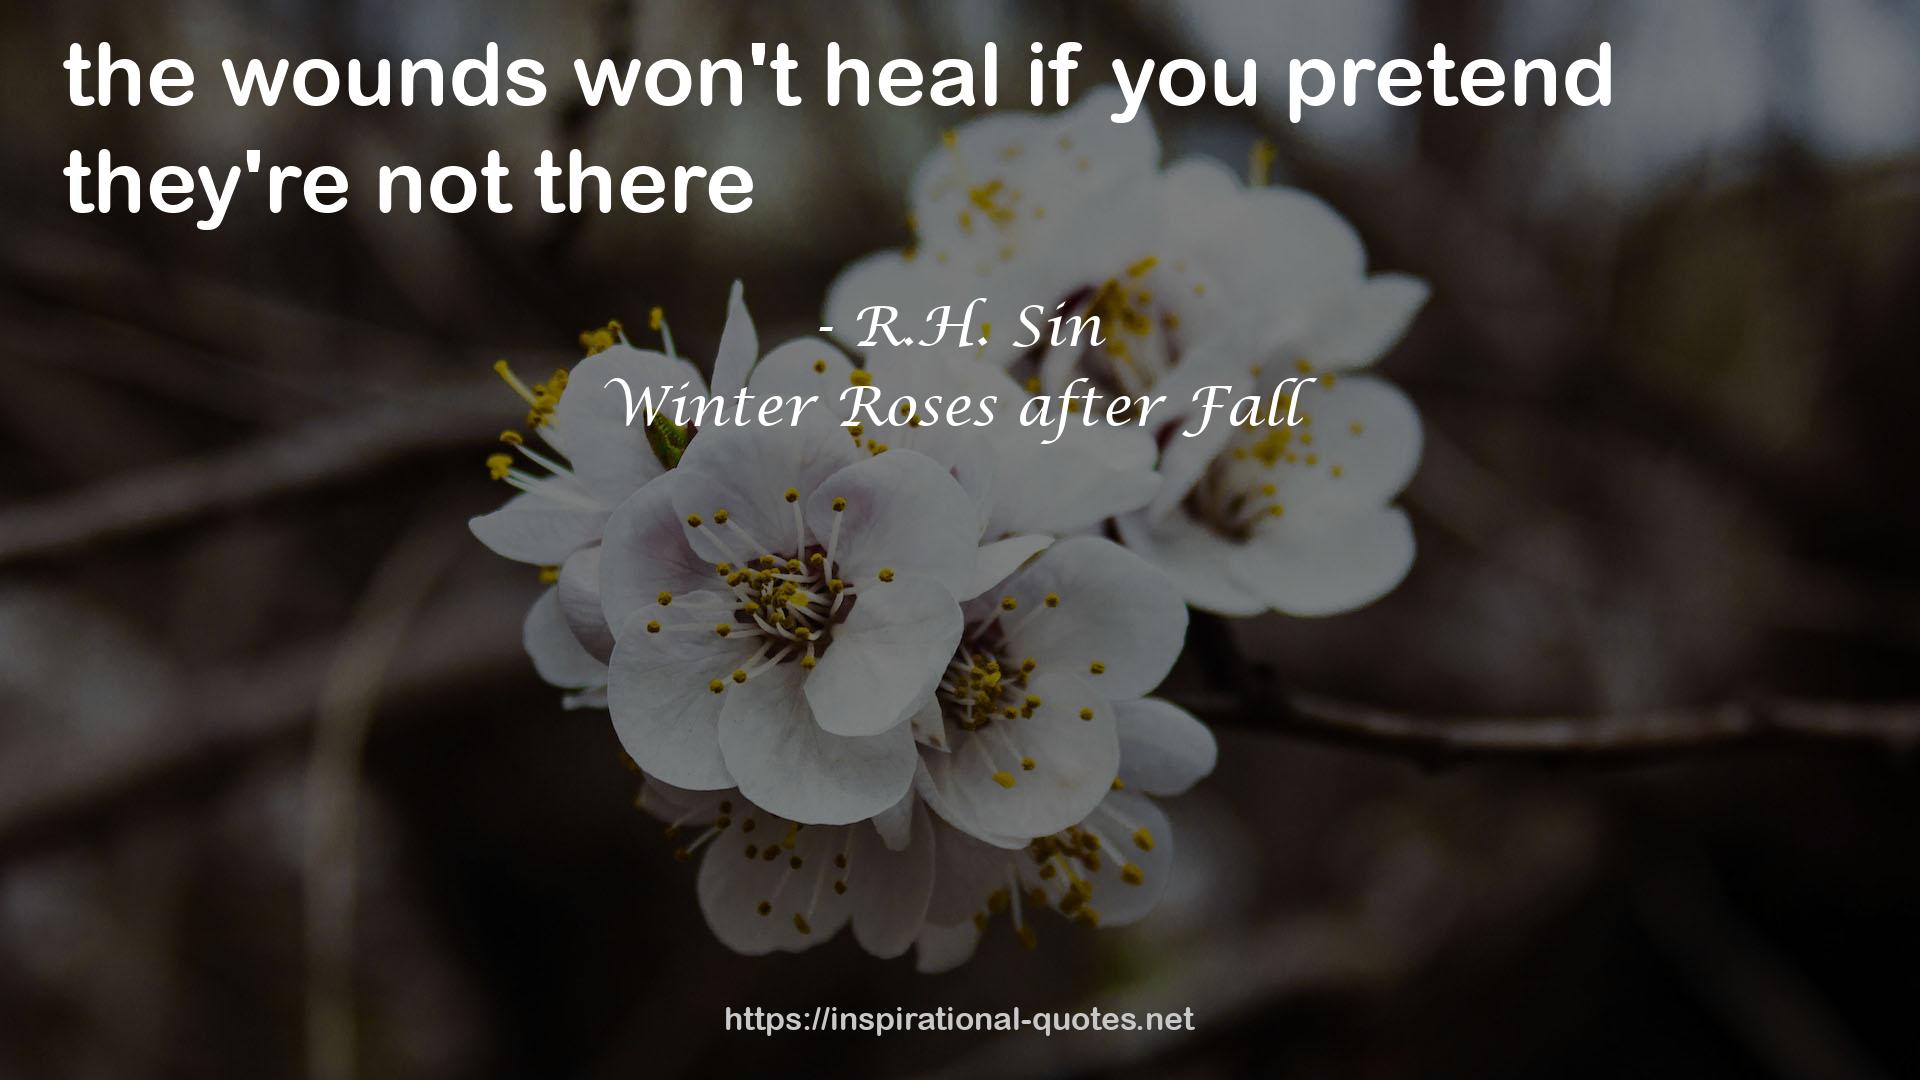 Winter Roses after Fall QUOTES